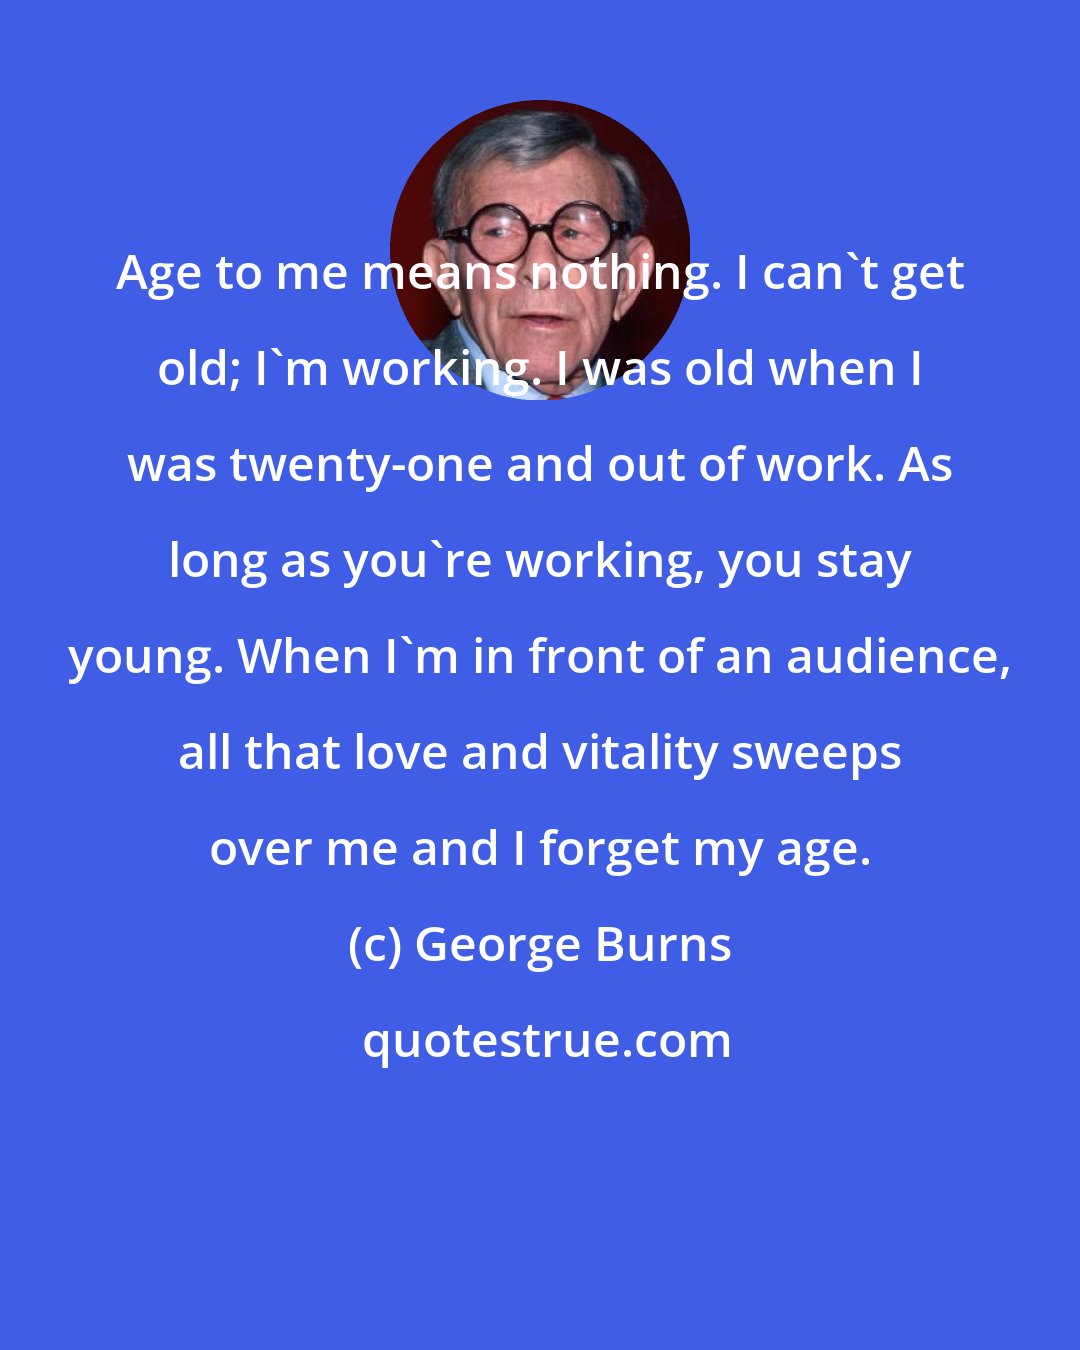 George Burns: Age to me means nothing. I can't get old; I'm working. I was old when I was twenty-one and out of work. As long as you're working, you stay young. When I'm in front of an audience, all that love and vitality sweeps over me and I forget my age.